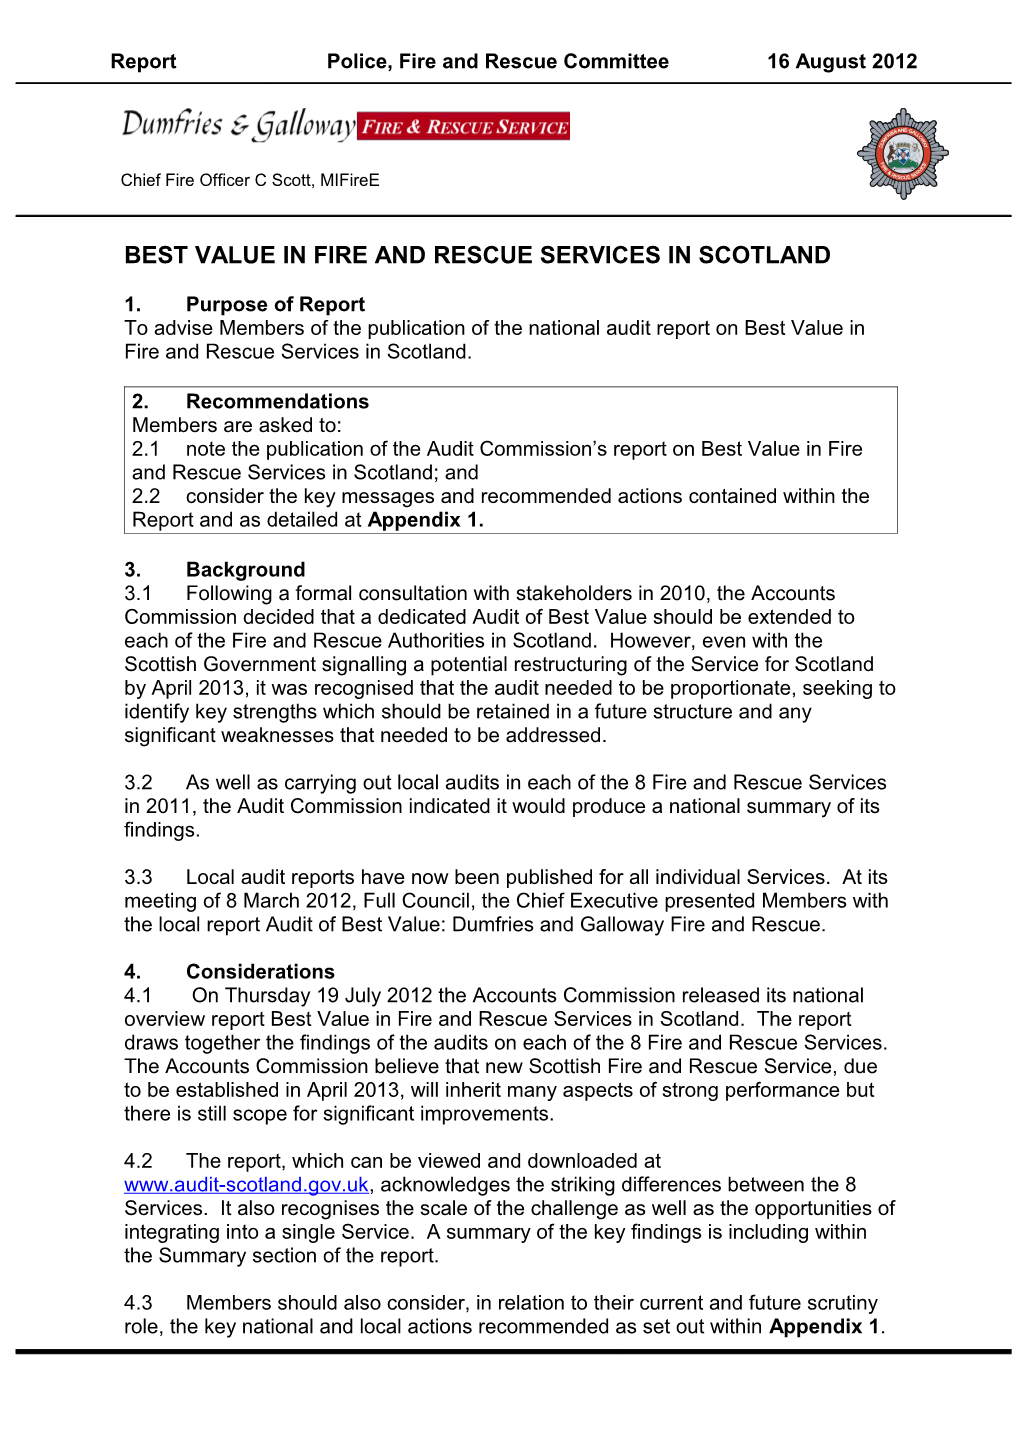 Best Value in Fire and Rescue Services in Scotland